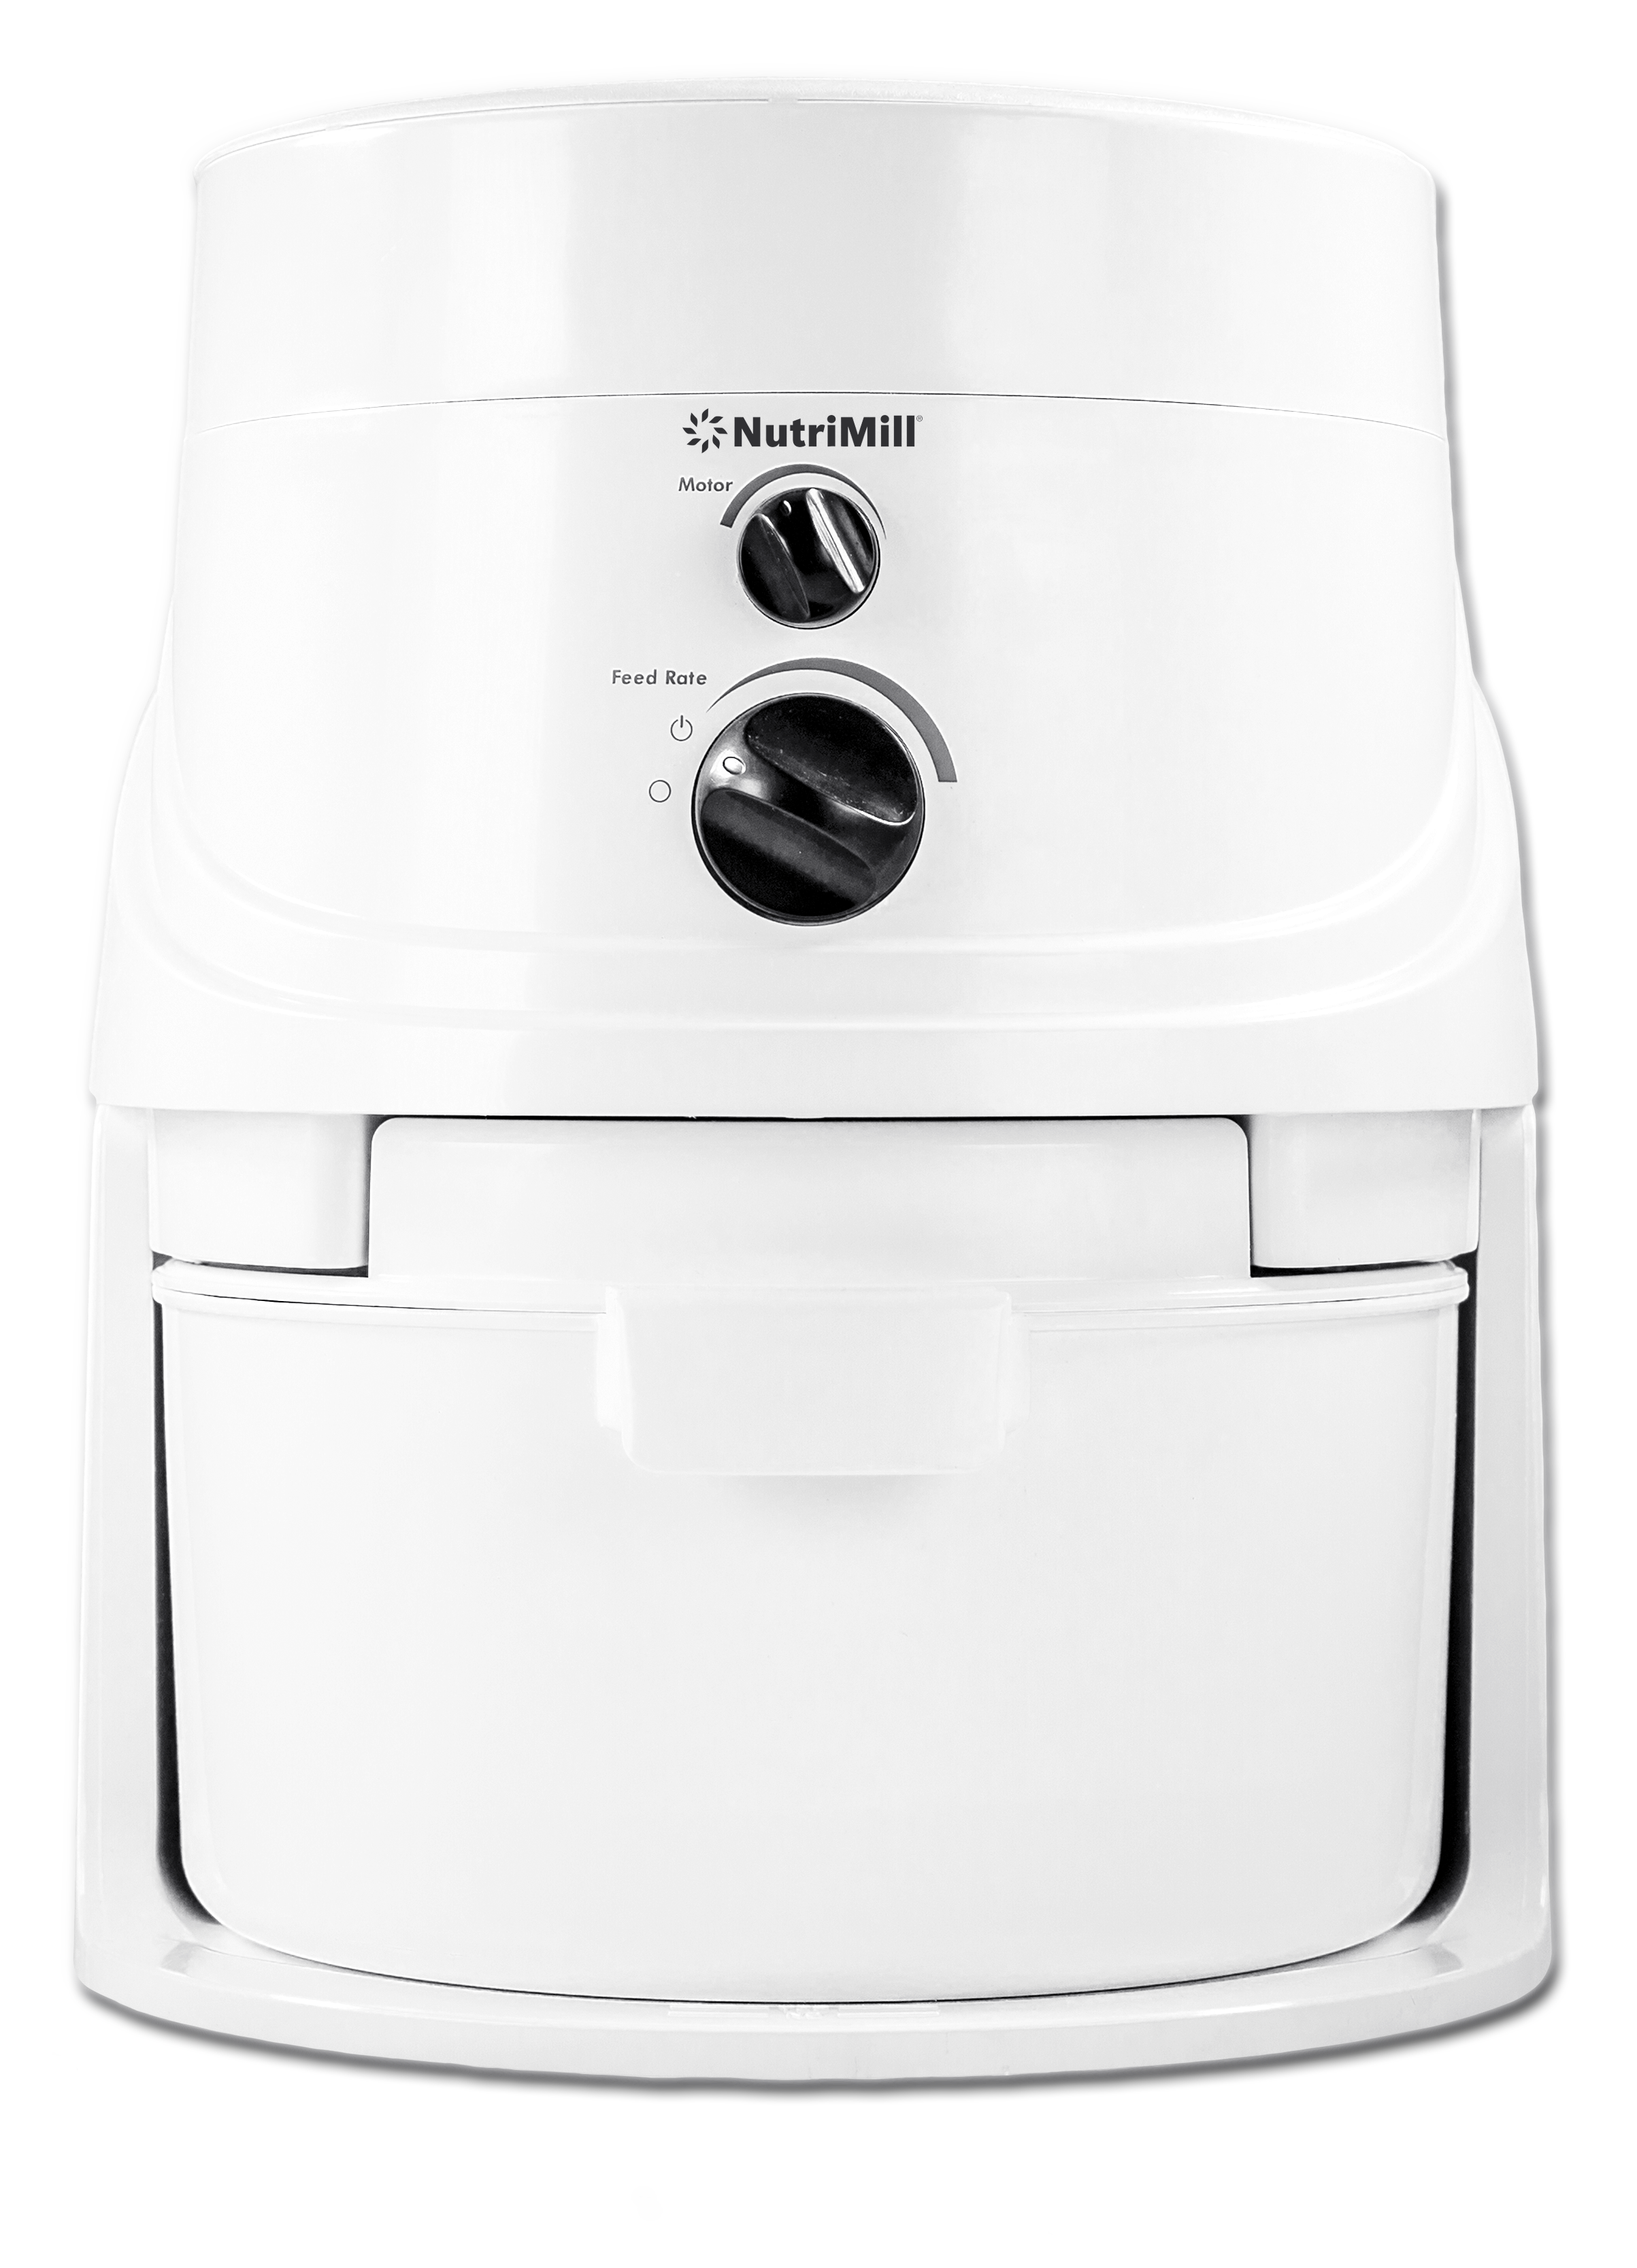 Nutrimill Grain Mill 760200 Free Shipping in Canada - Out of stock - accepting pre-orders